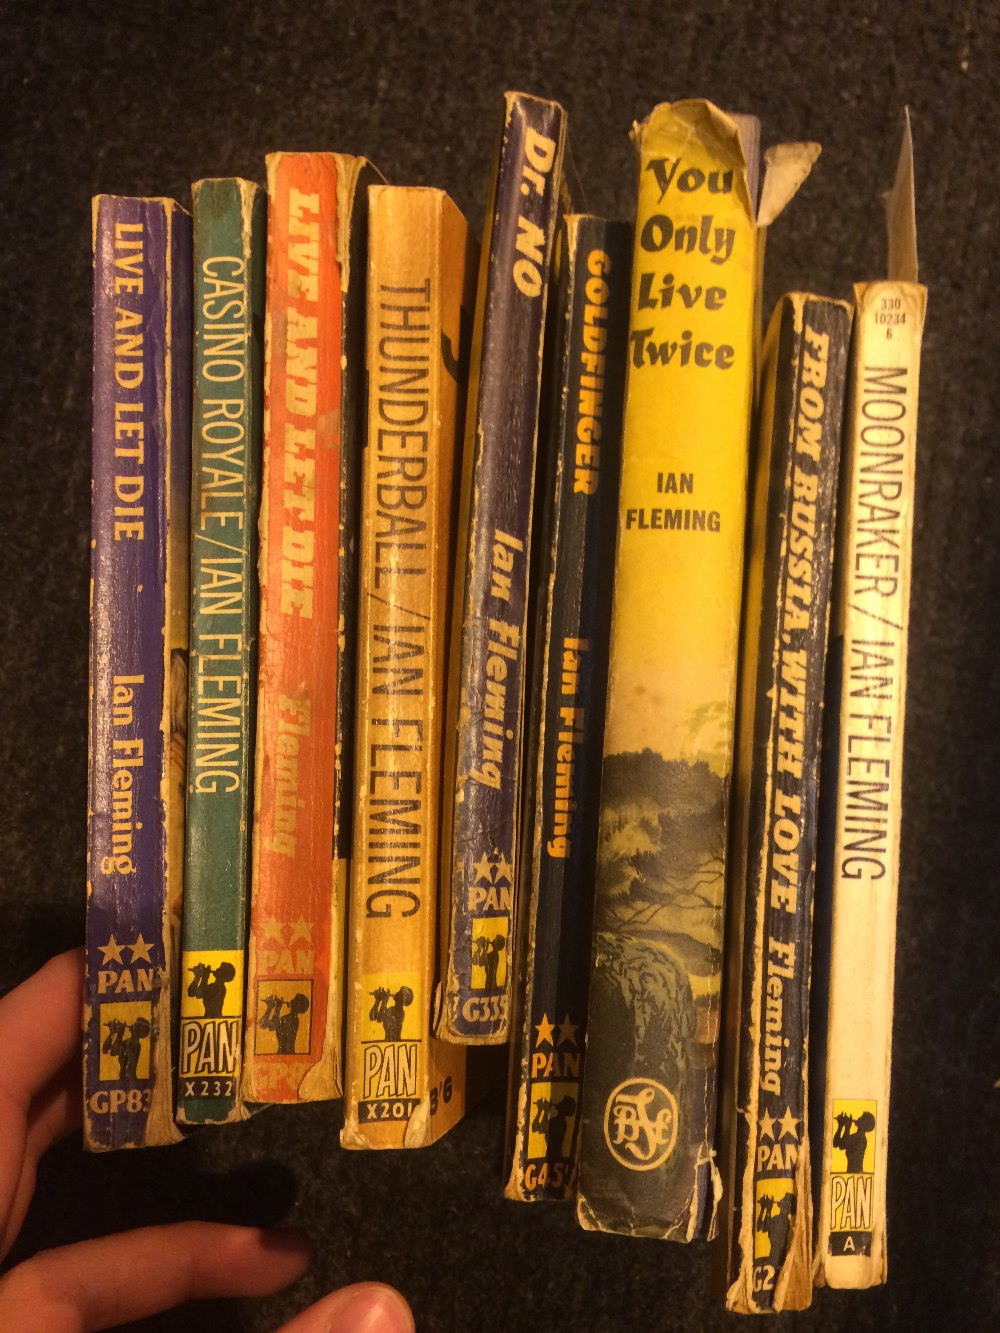 Eight James Bond Ian Fleming paperback books and a hard back Book Club edition of you only live